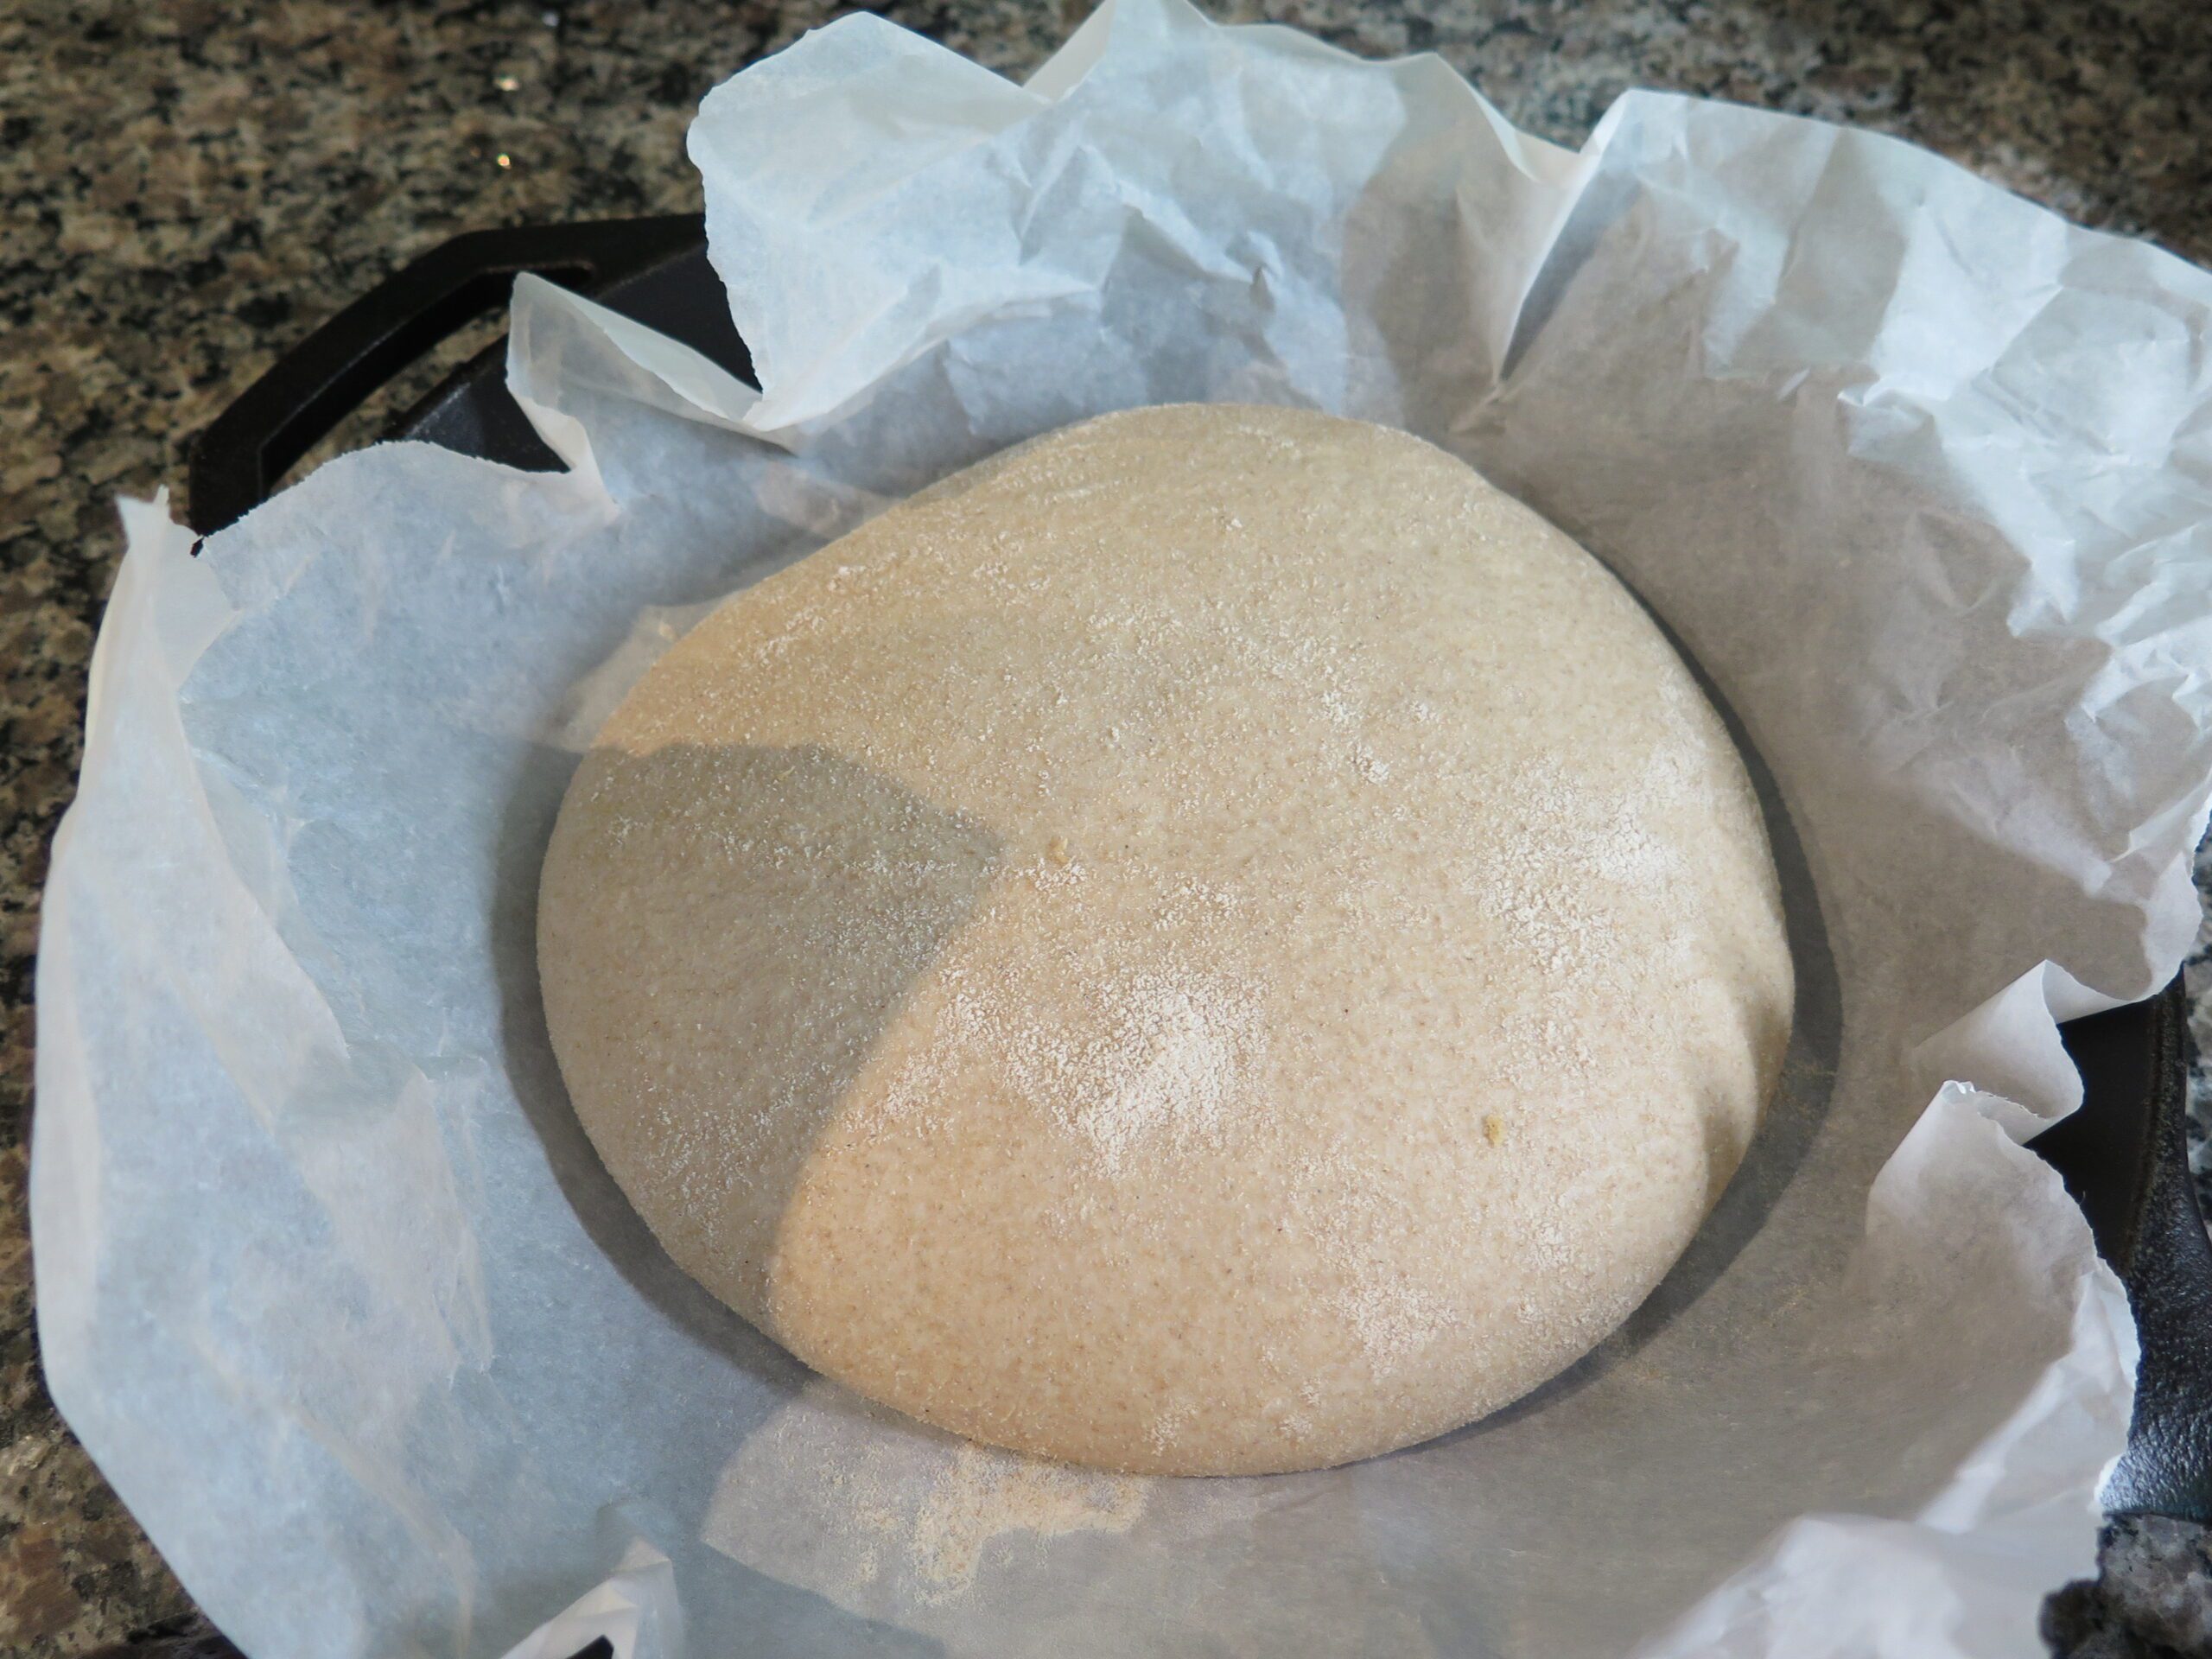 After proofing of dough